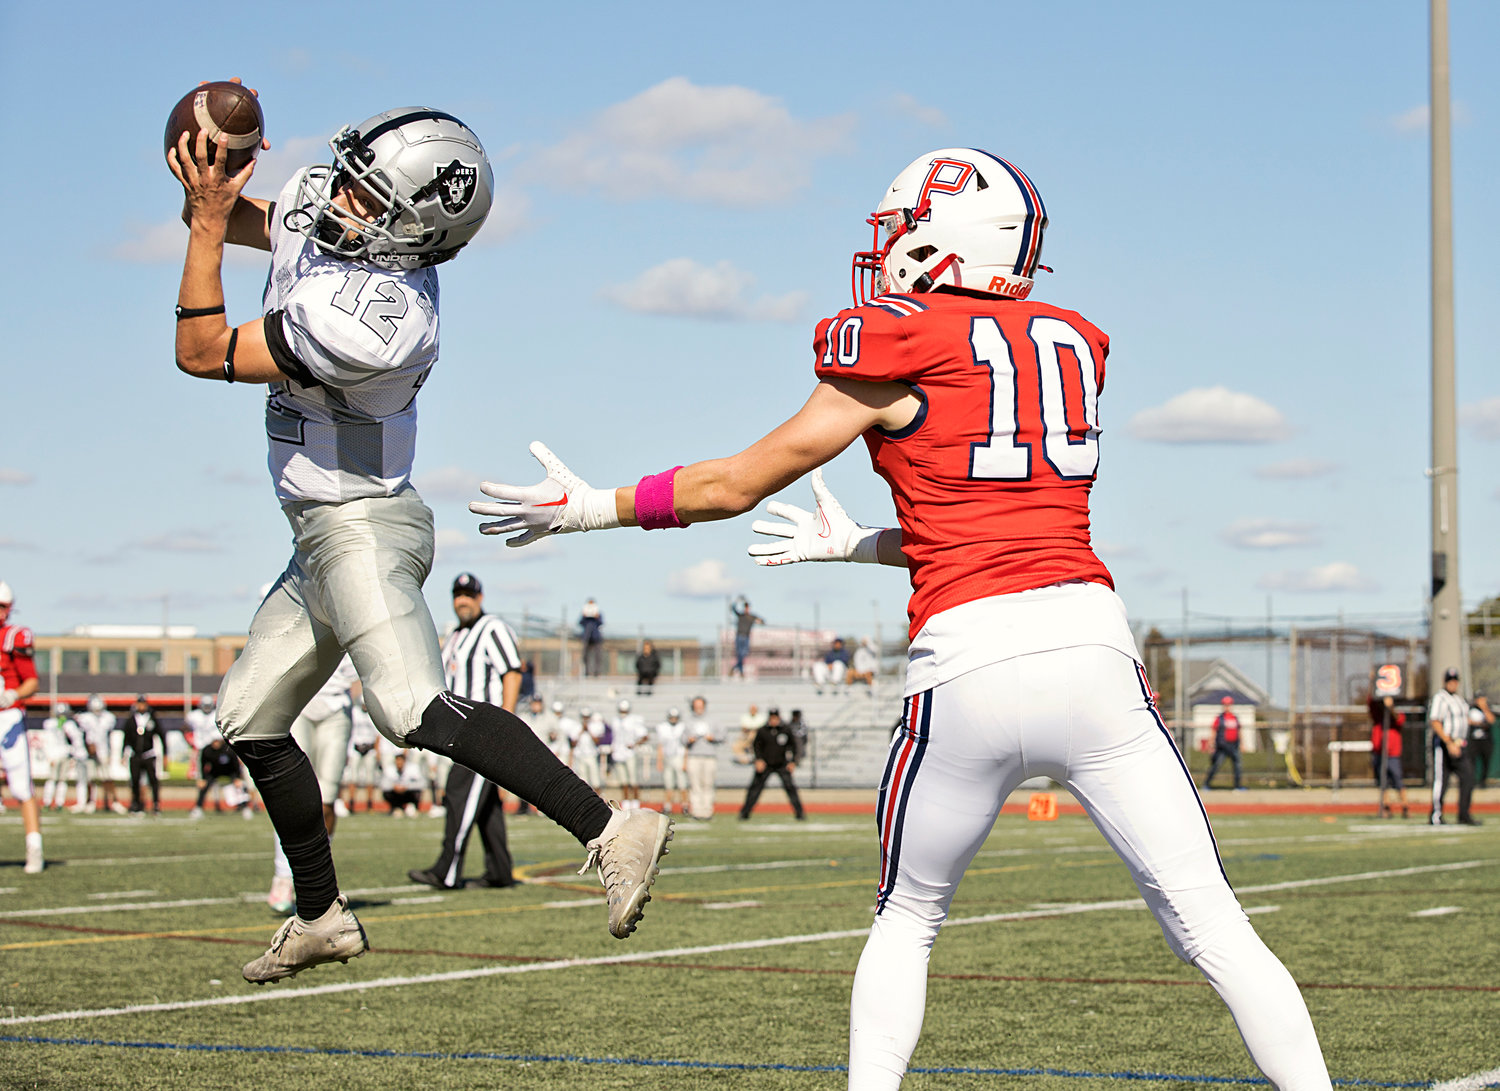 A pass intended for Evan Tullson (right) gets intercepted by a Shea opponent during the first half of Saturday’s game.